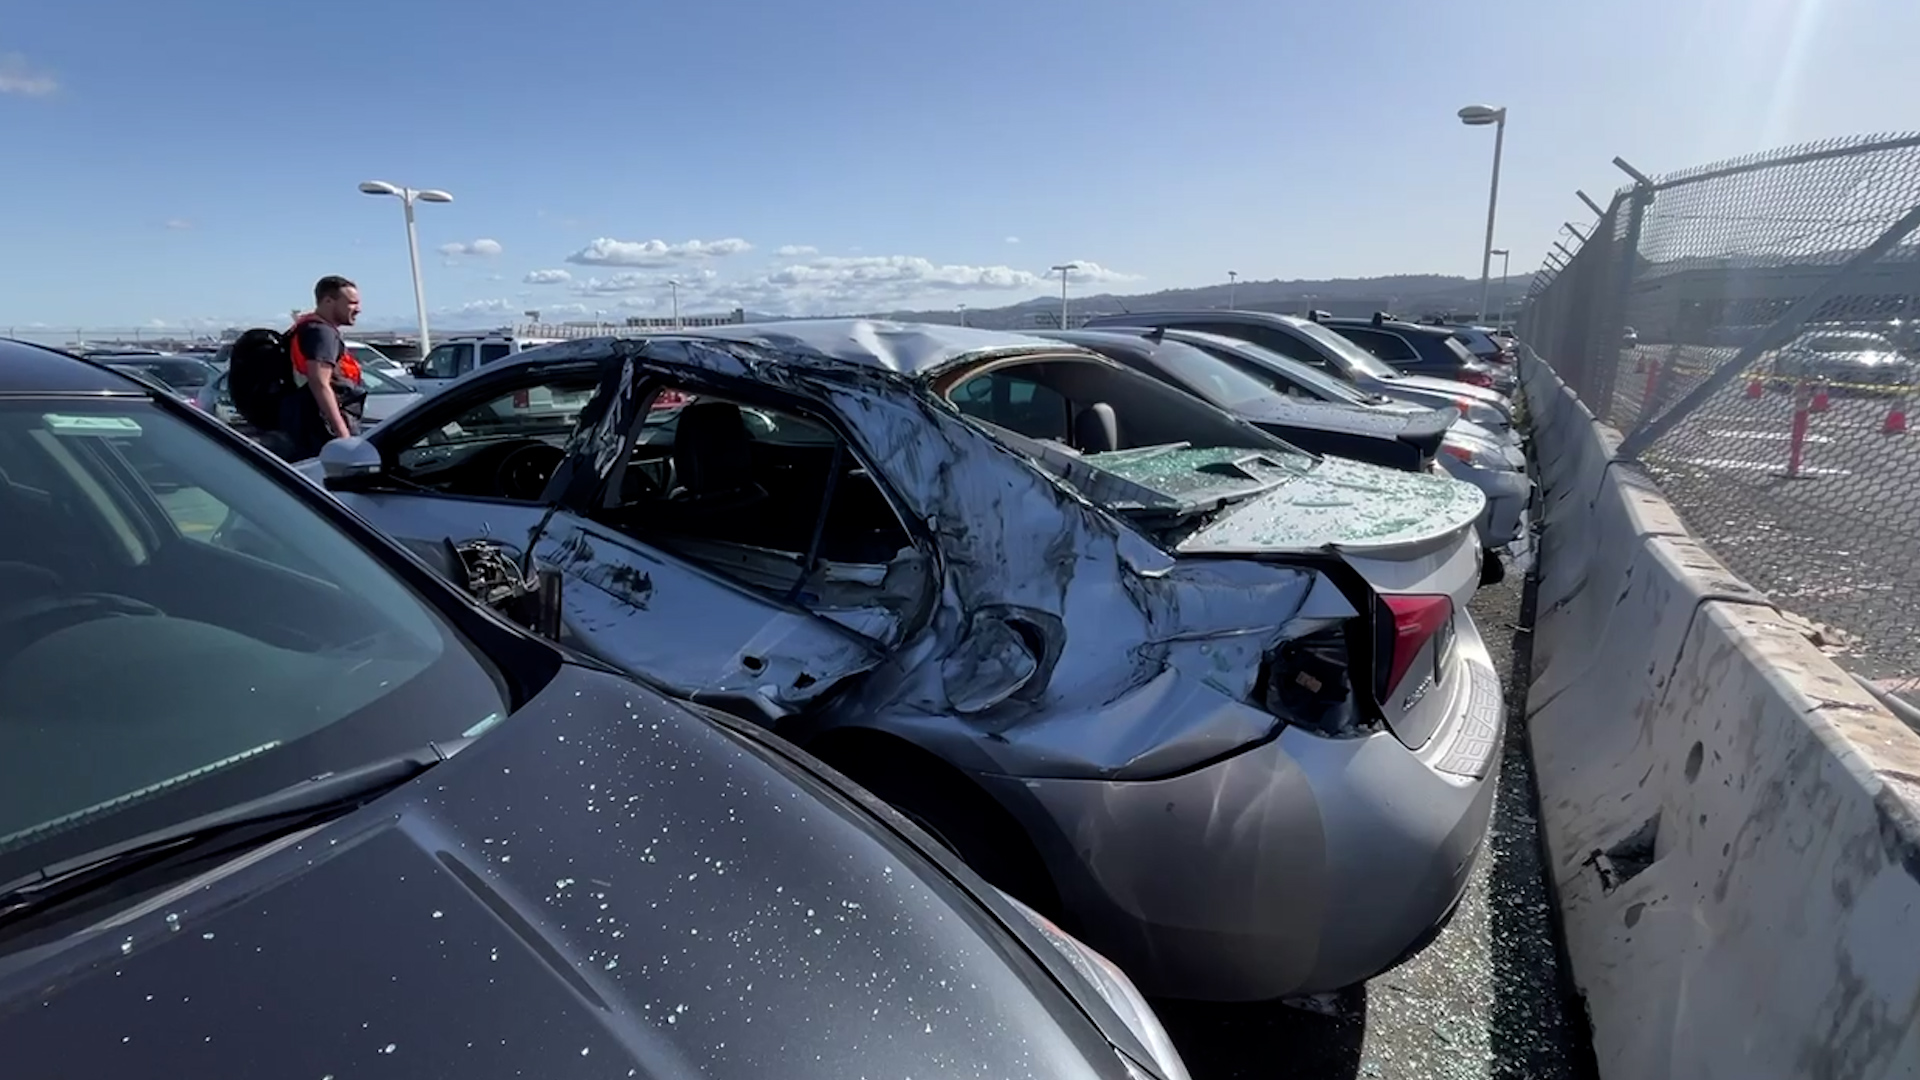 A damaged car in a parking lot, surrounded by intact vehicles, with a person nearby.